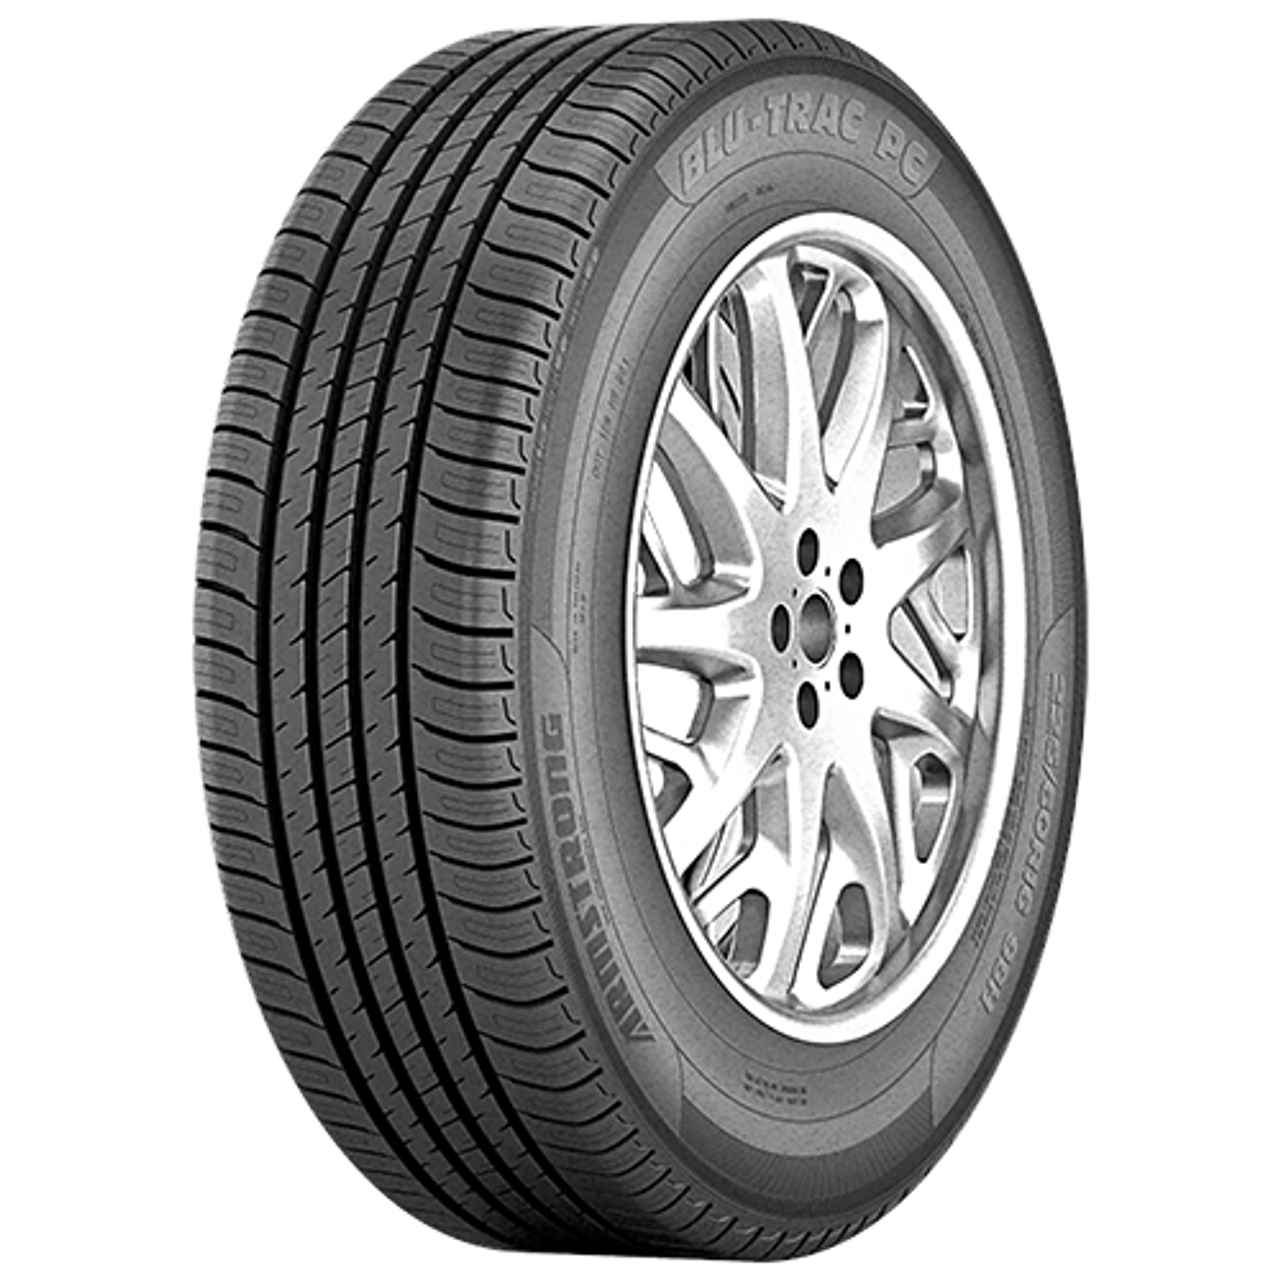 ARMSTRONG BLU-TRAC PC 175/65R14 82H BSW von Armstrong